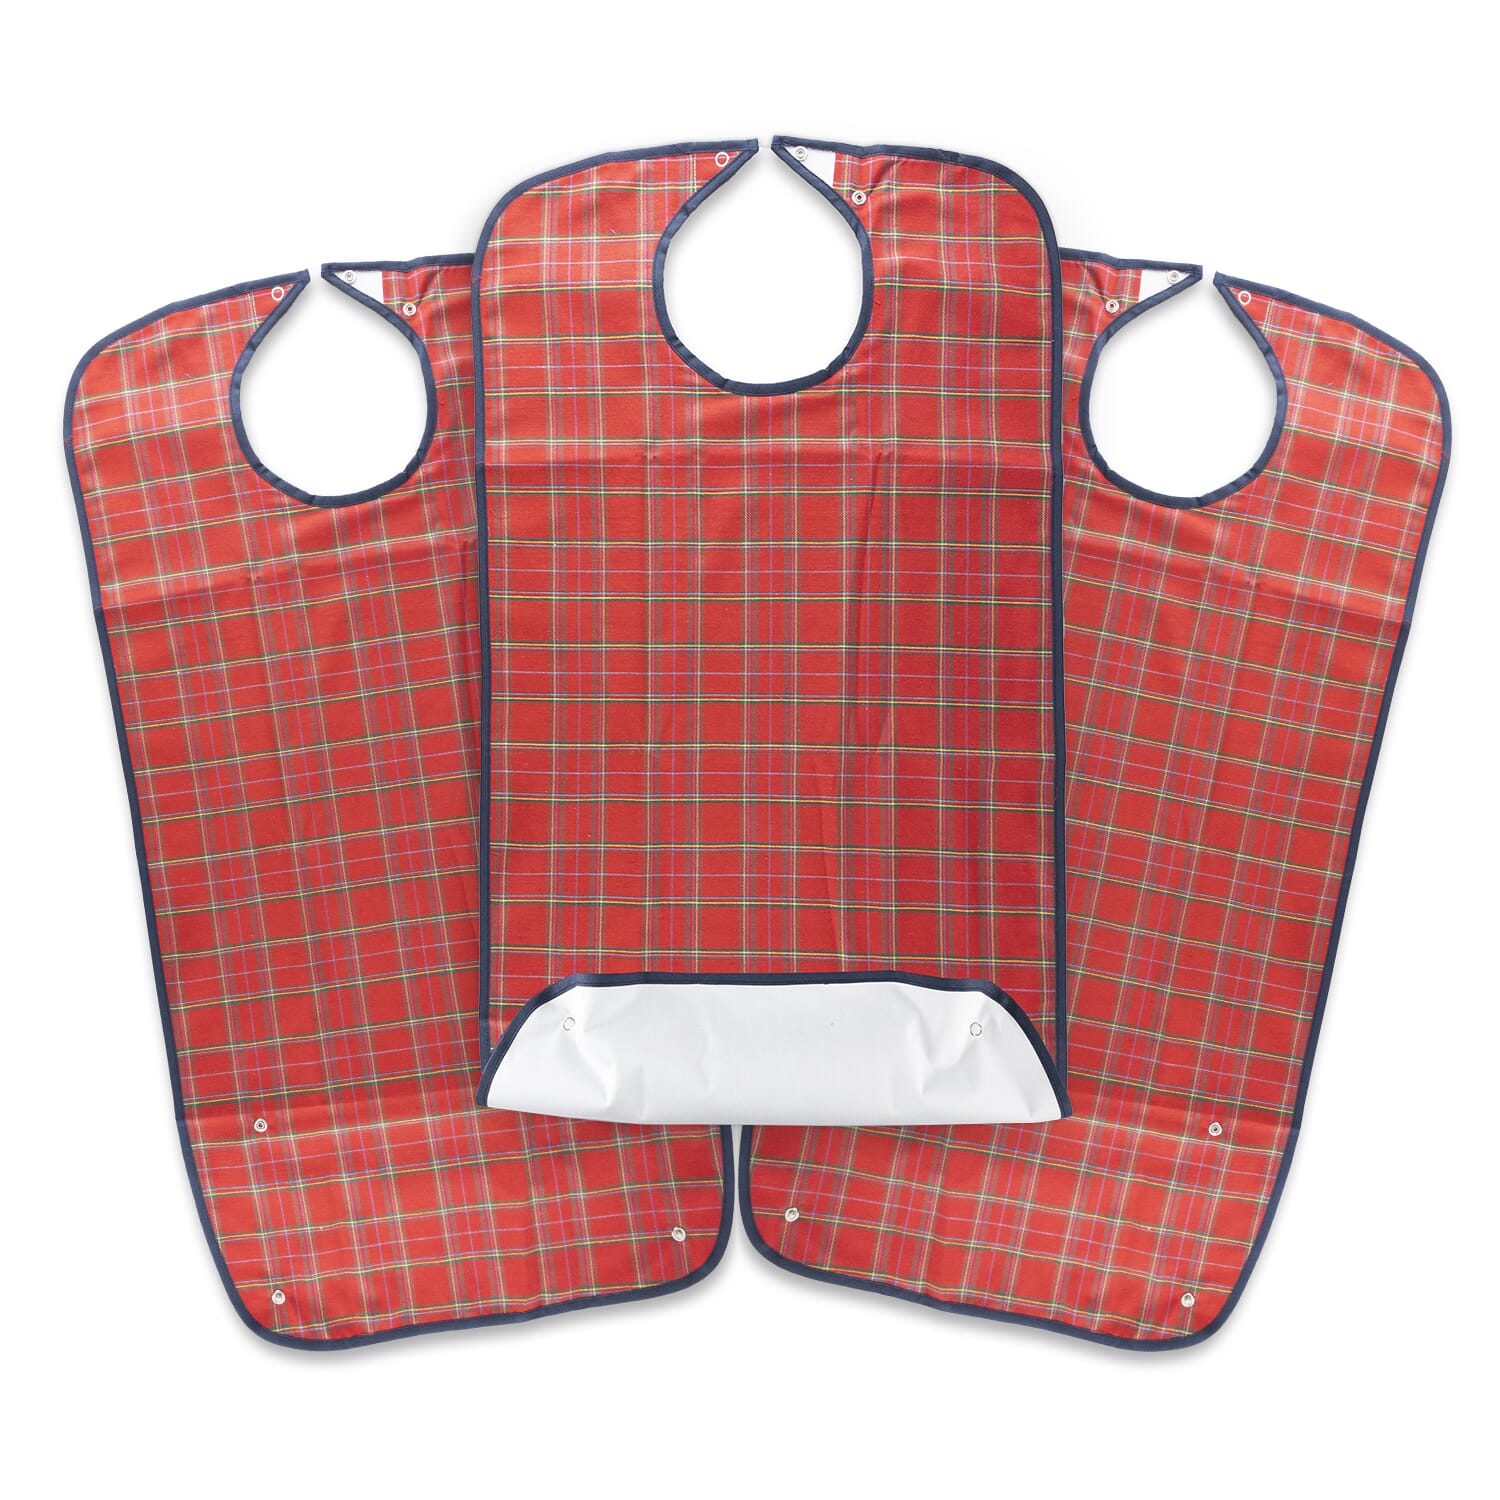 View Everyday Bib Large Red Pack of 3 information